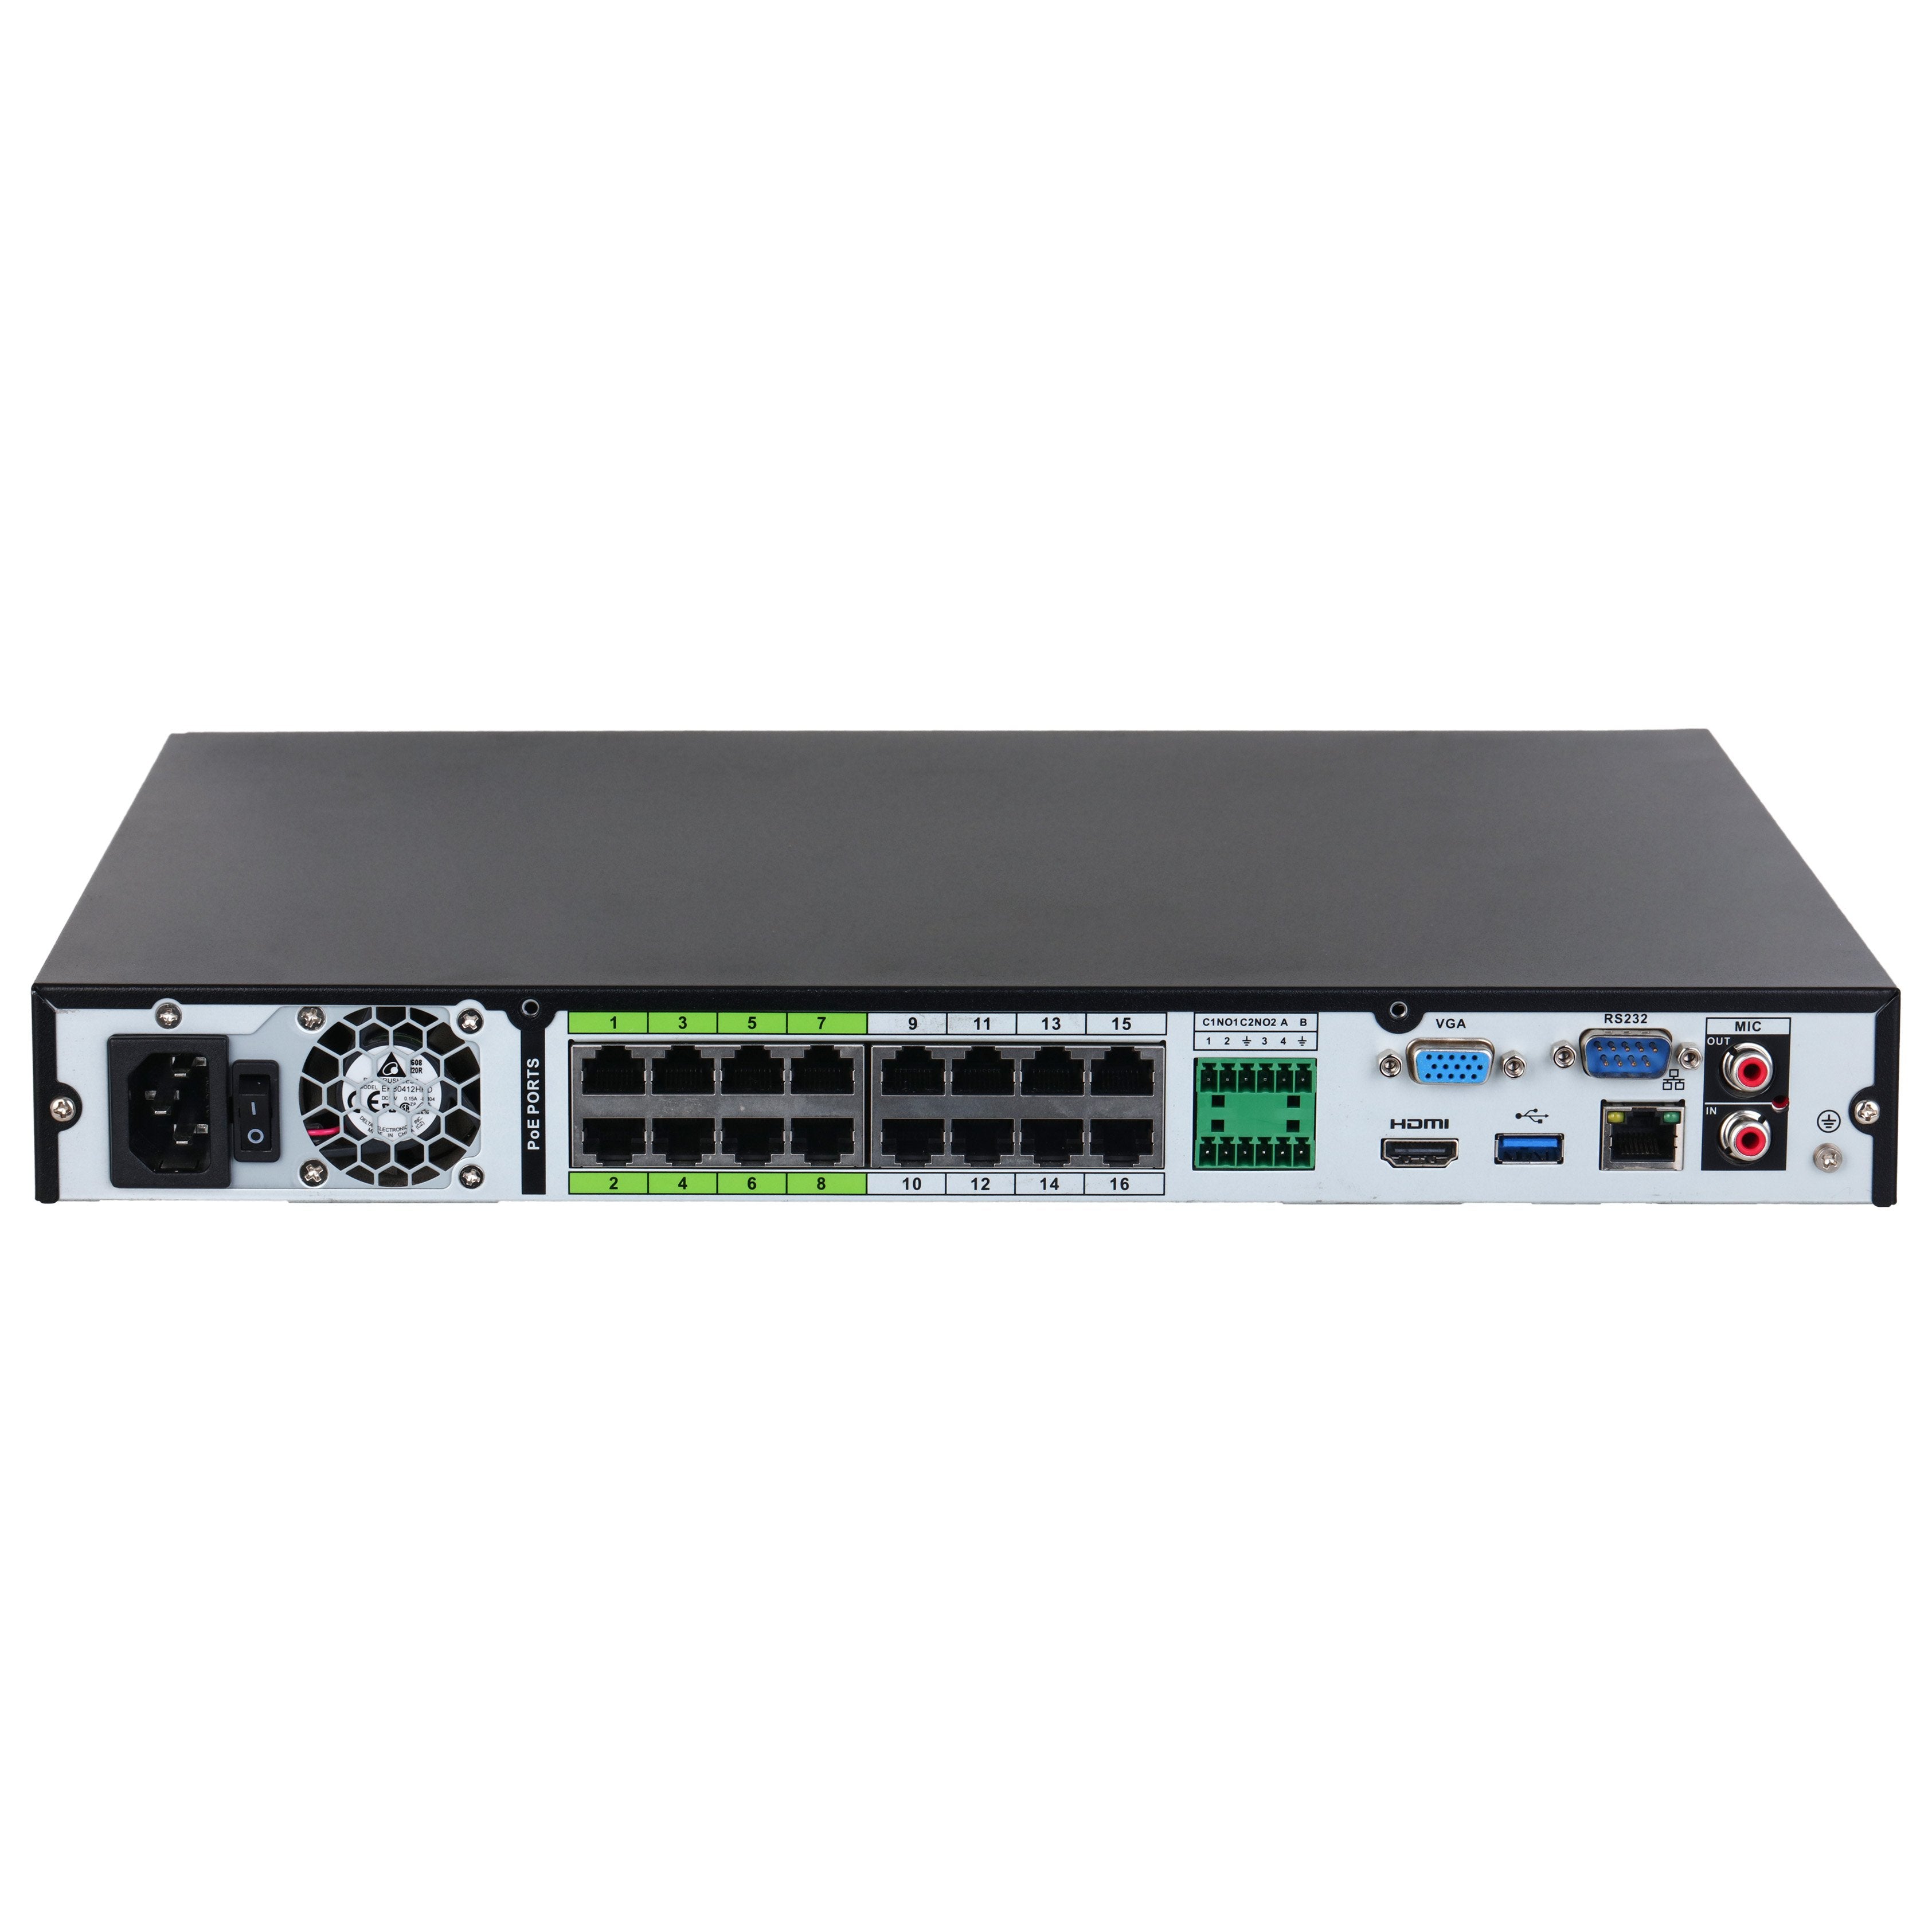 Dahua 16 Channel, WizSense AI Series, 16 x POE, 1RU, 384MB (200MB With AI Function Enabled), 1 x Gigabit NIC, 2 x HDD **NO HDD INSTALLED**